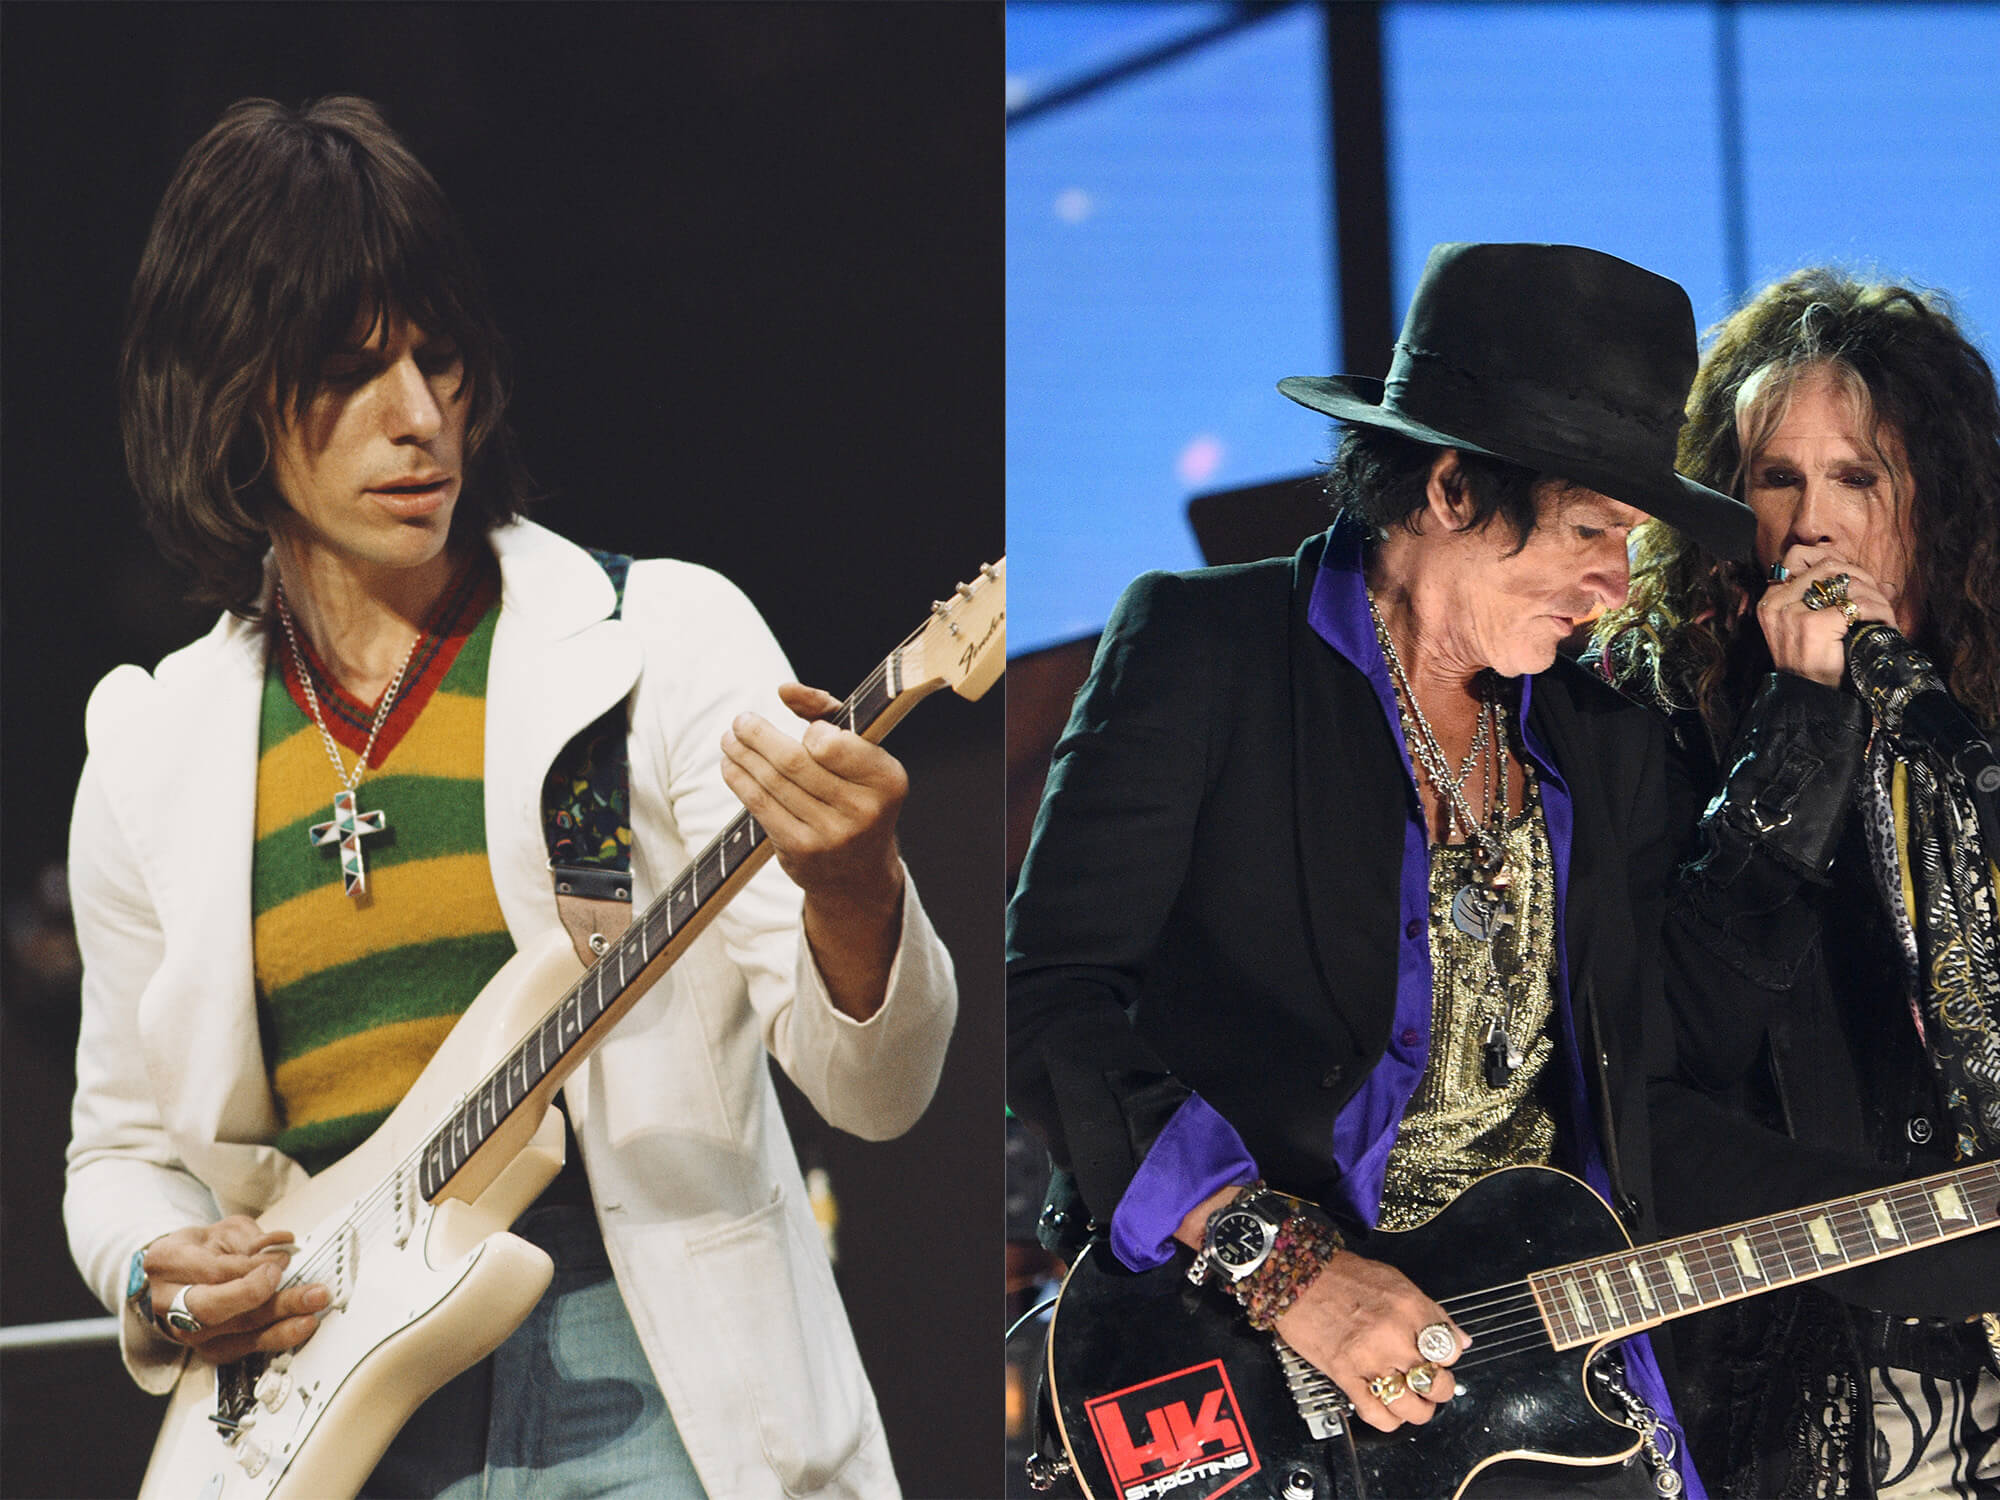 Jeff Beck and Joe Perry